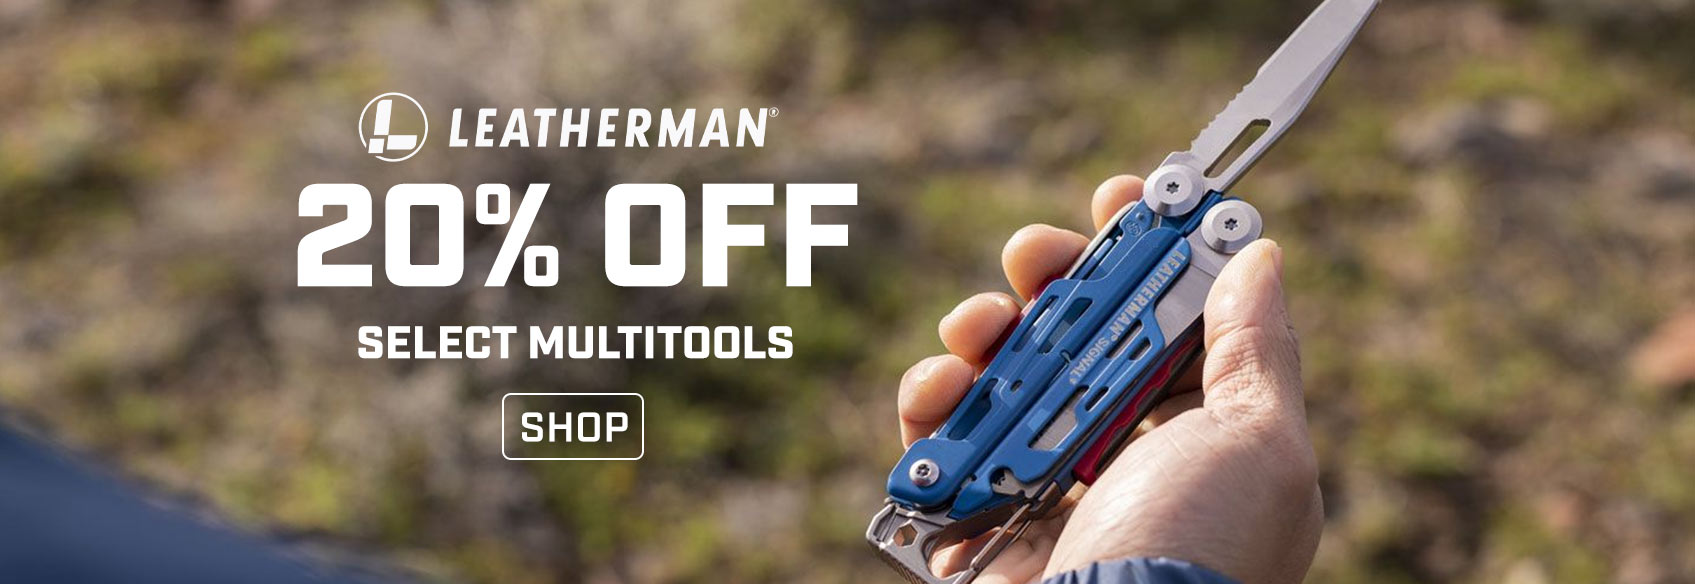 A hand holding a blue Leatherman multitool with the knife blade out - 20% off